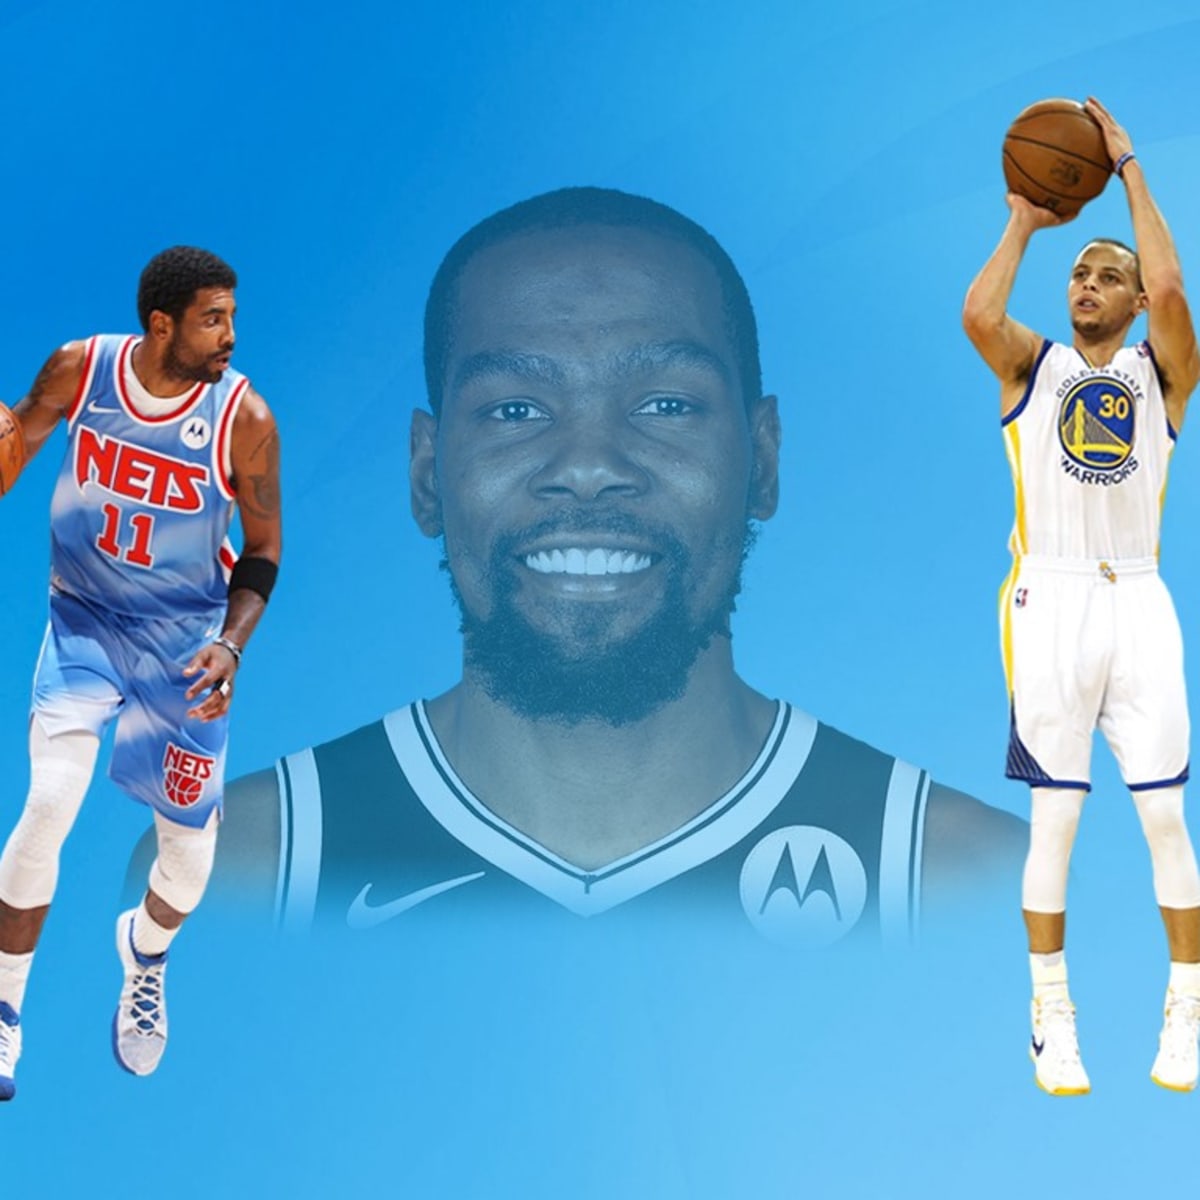 MEDIA DAY: A new chapter for Kevin Durant and Kyrie Irving resides